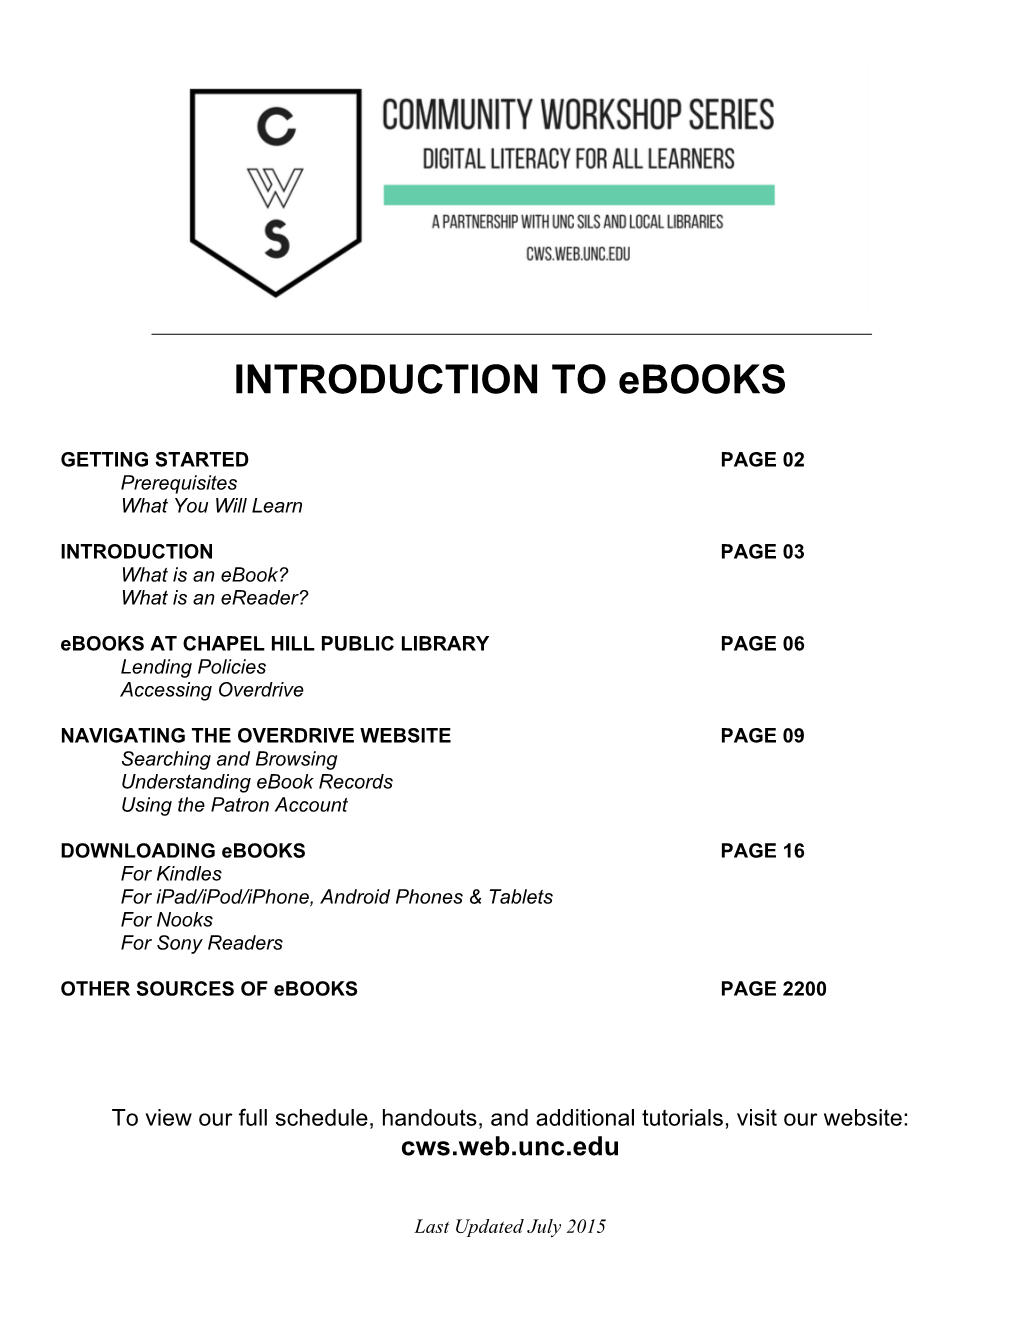 Introduction to Ebooks Handout